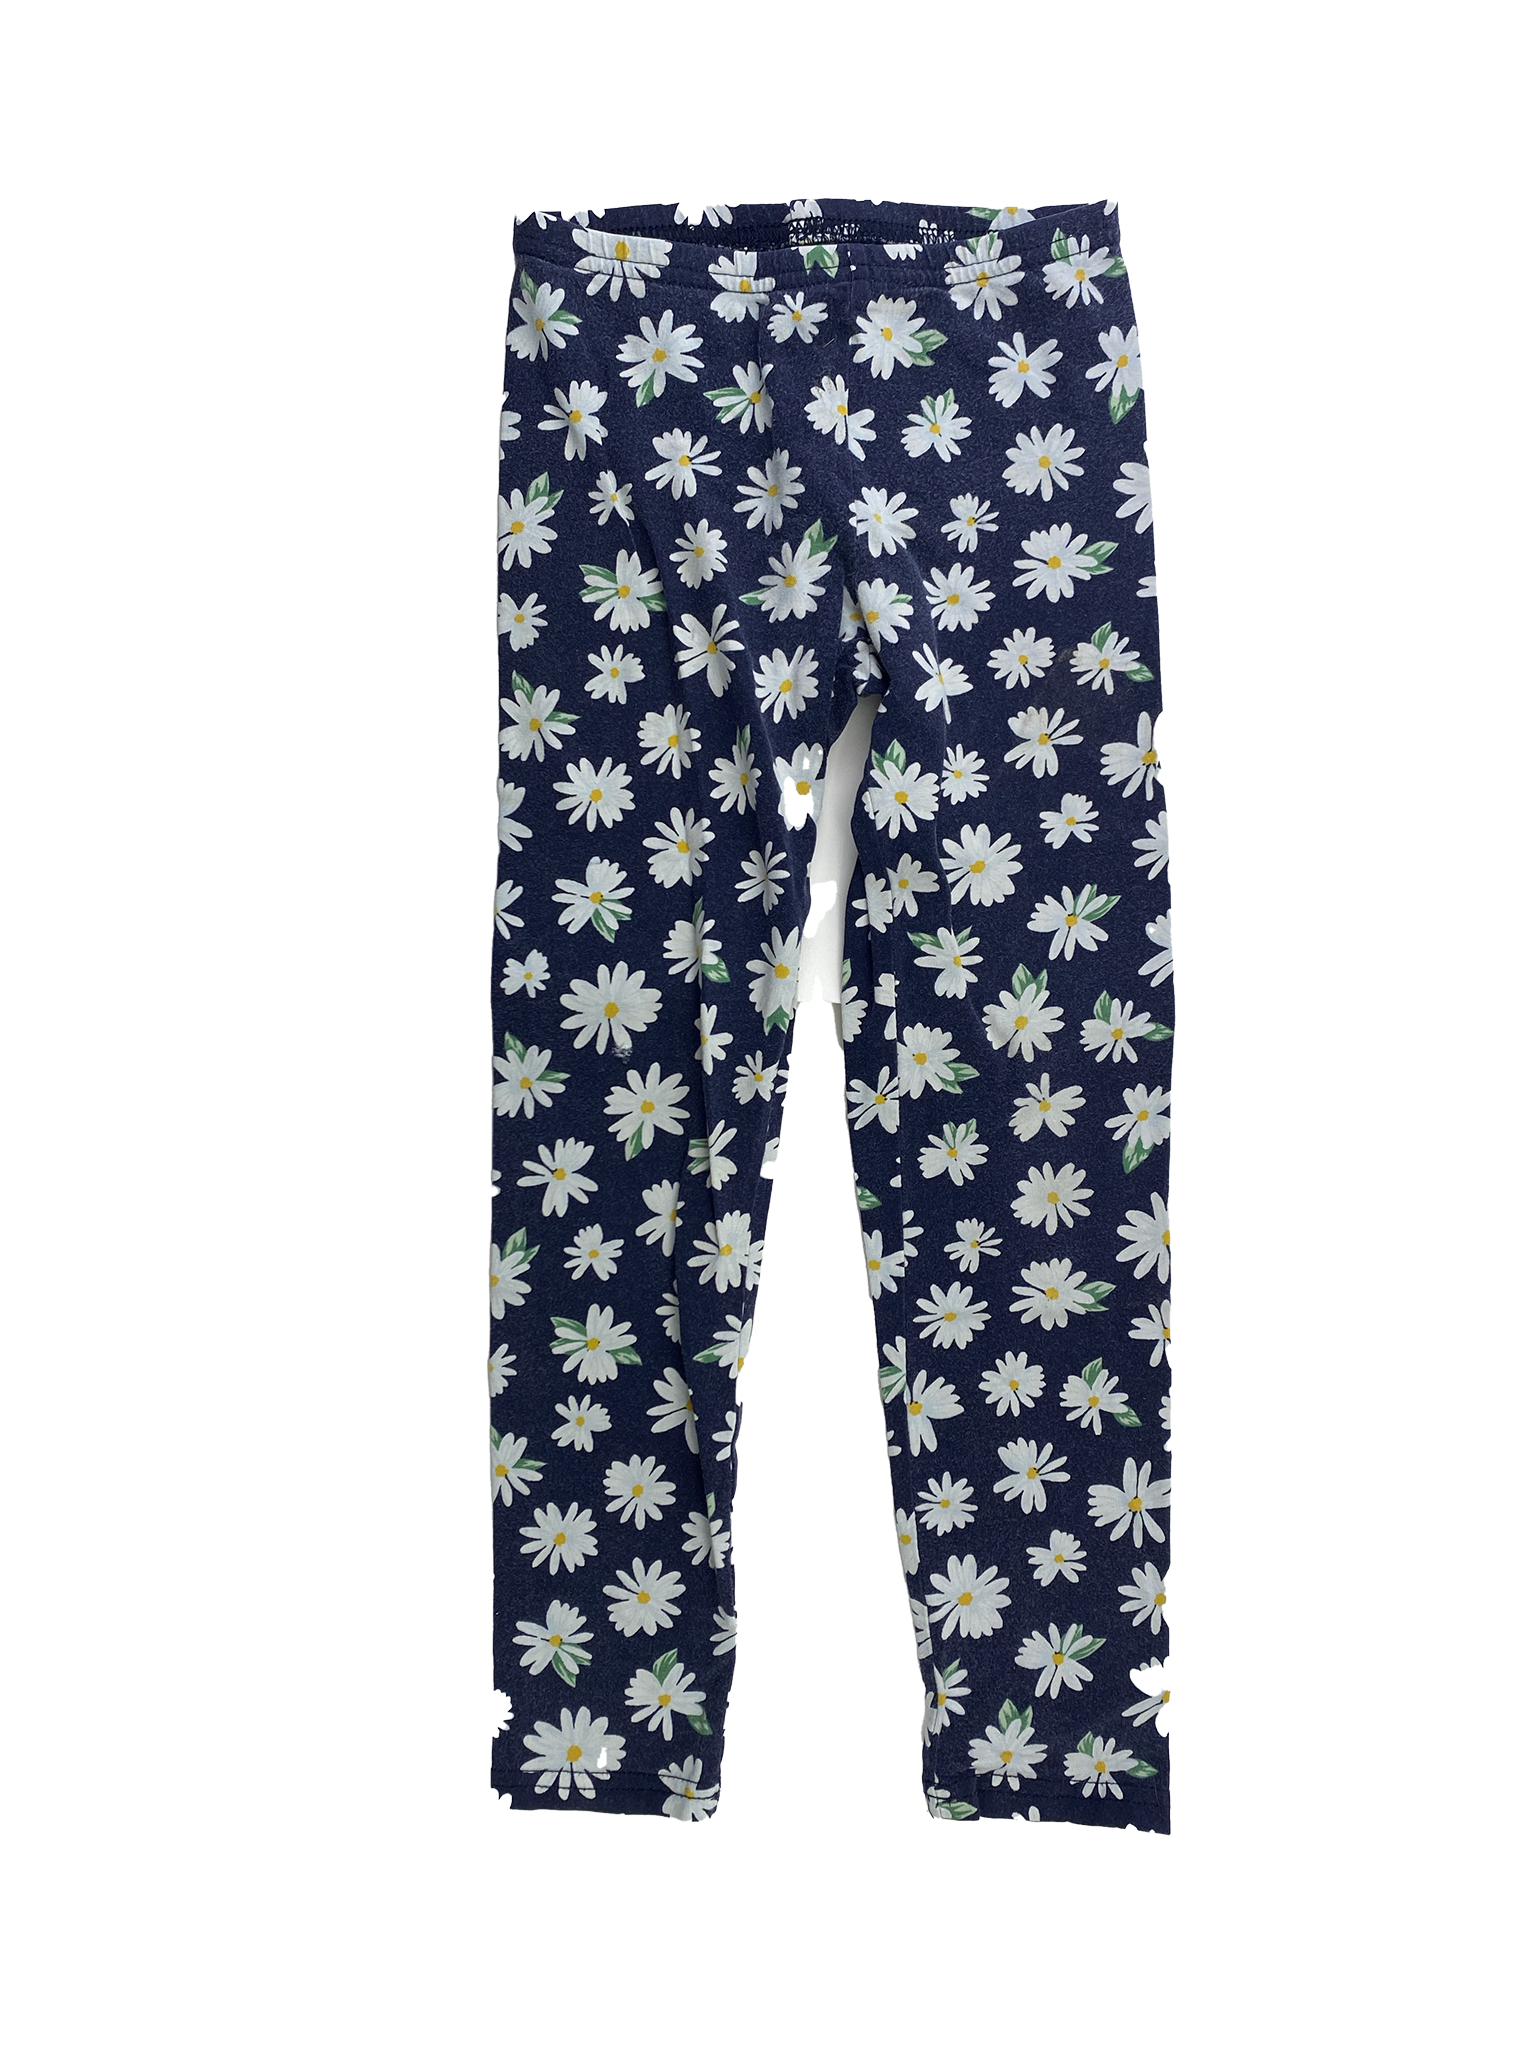 ❗️Small Hole: Old Navy Navy Leggings with Daisies 6-7